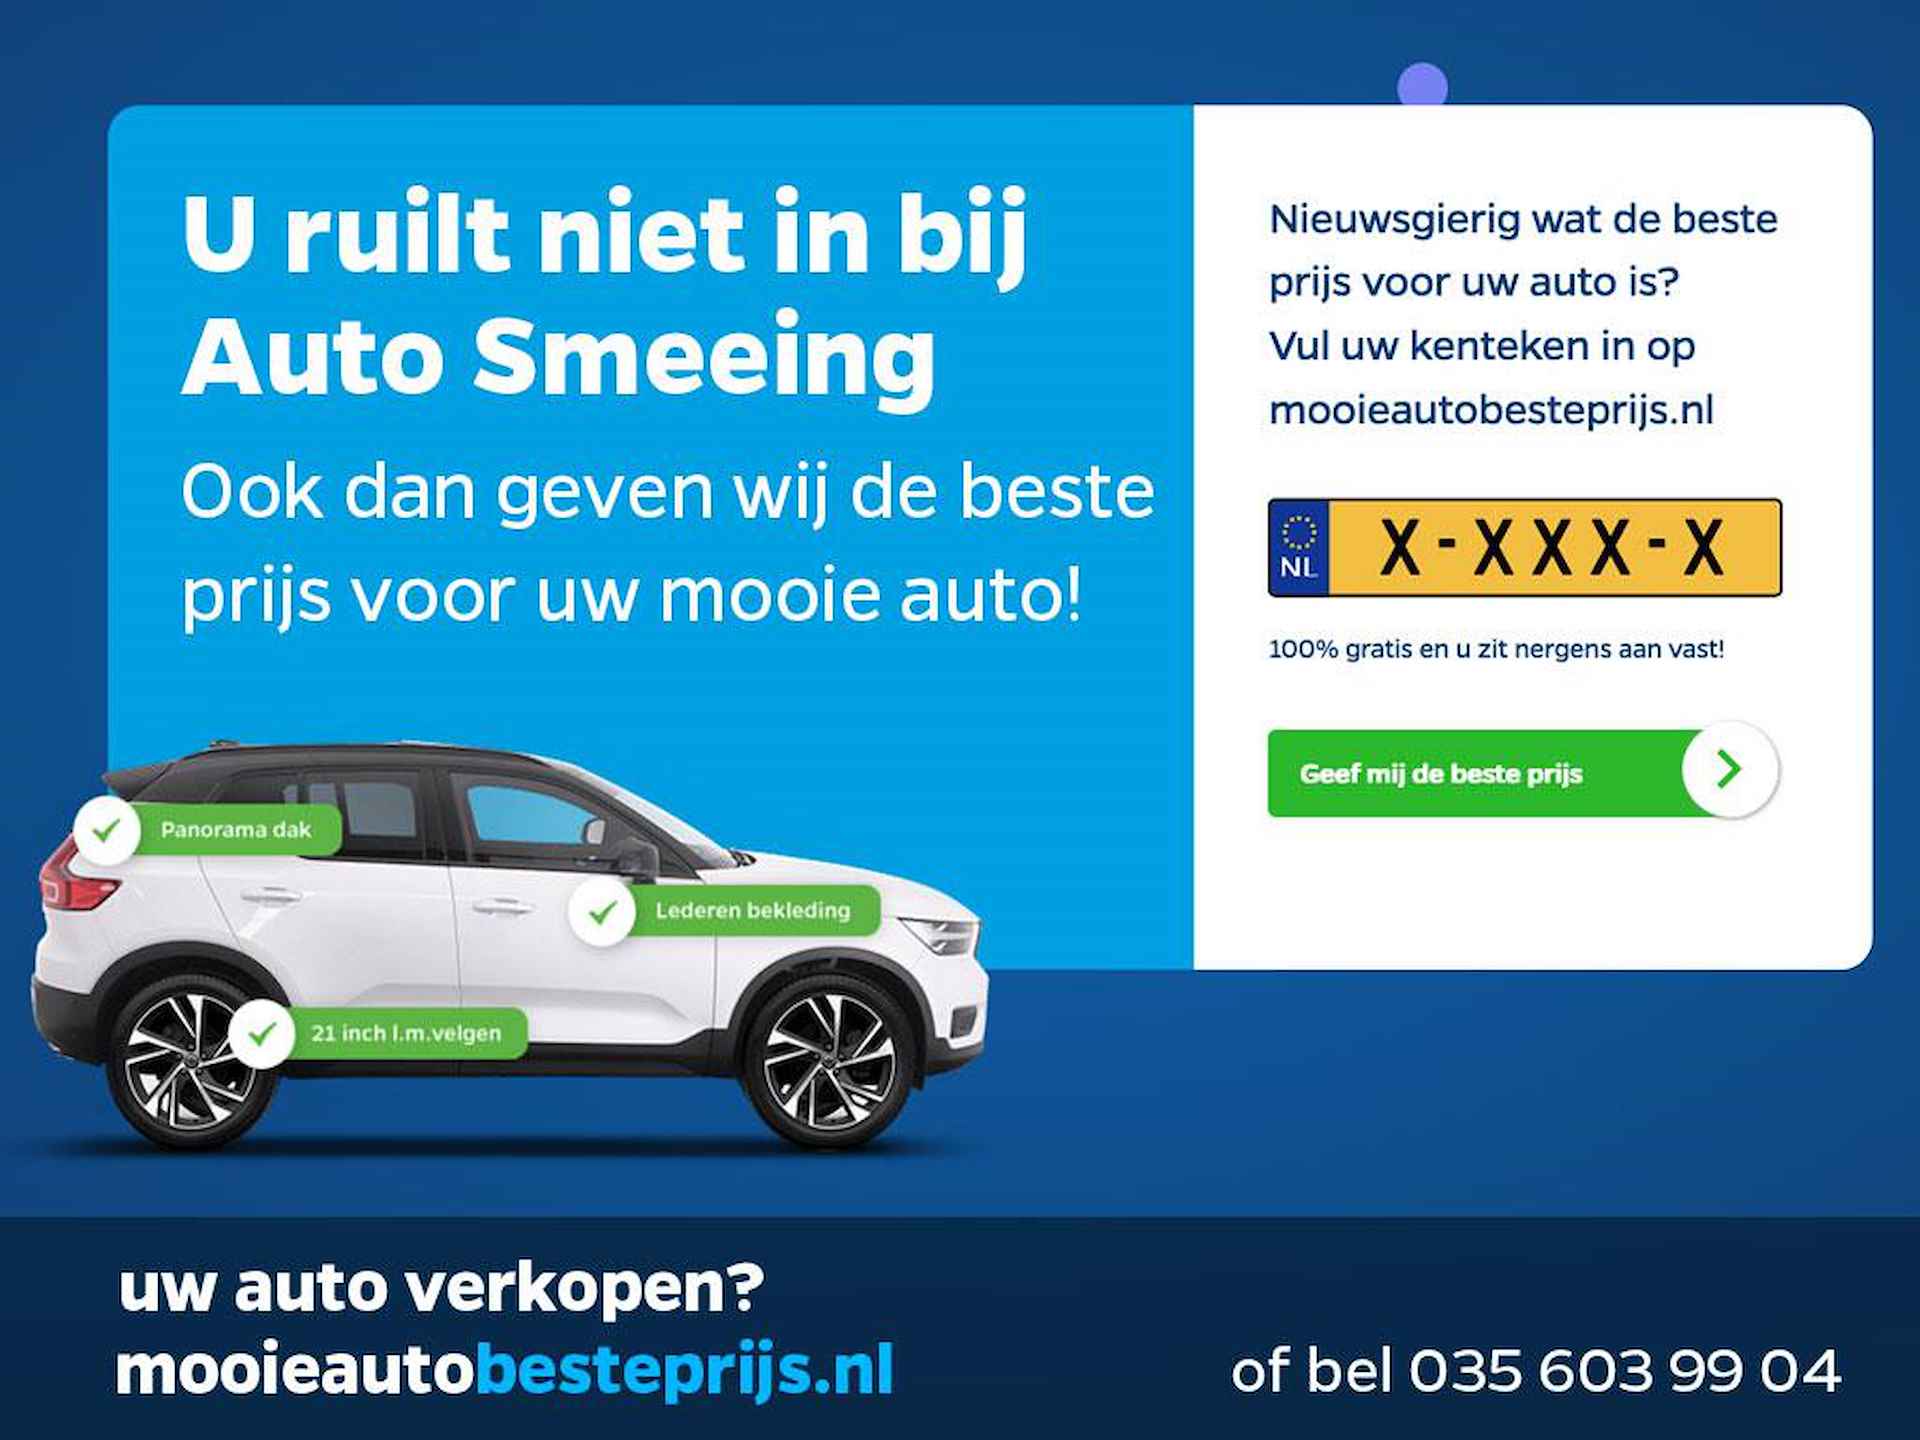 Volkswagen e-Up! 260KM WLTP | 14395 na subsidie | Camera | Zondag Open! - 5/6